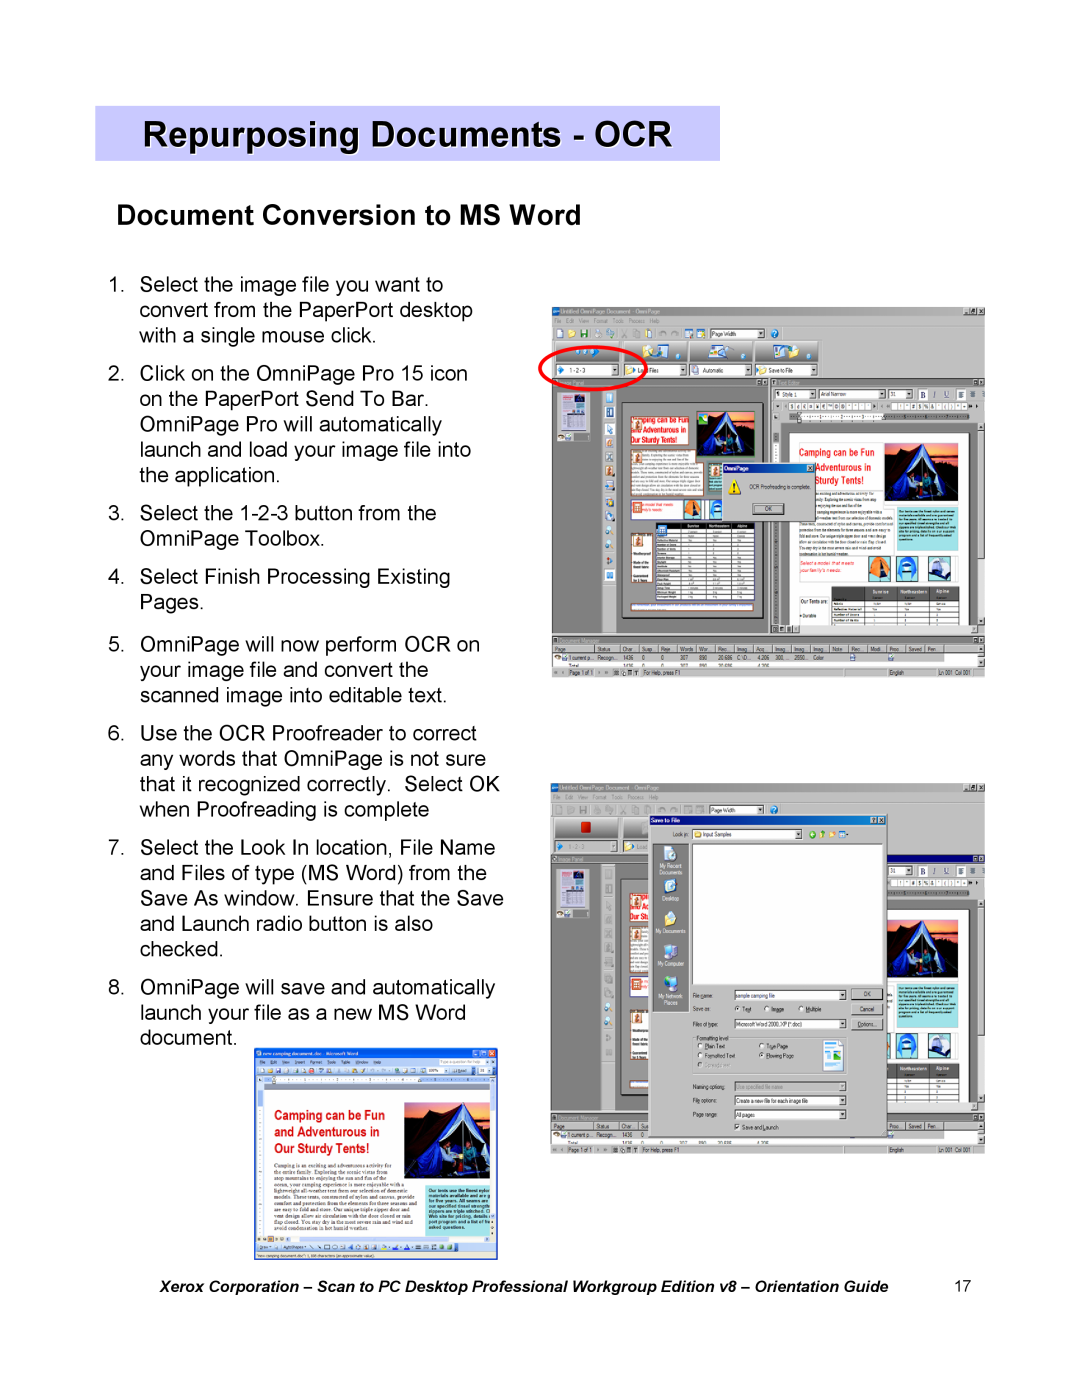 Xerox G8144Z manual Document Conversion to MS Word, Repurposing Documents - OCR 